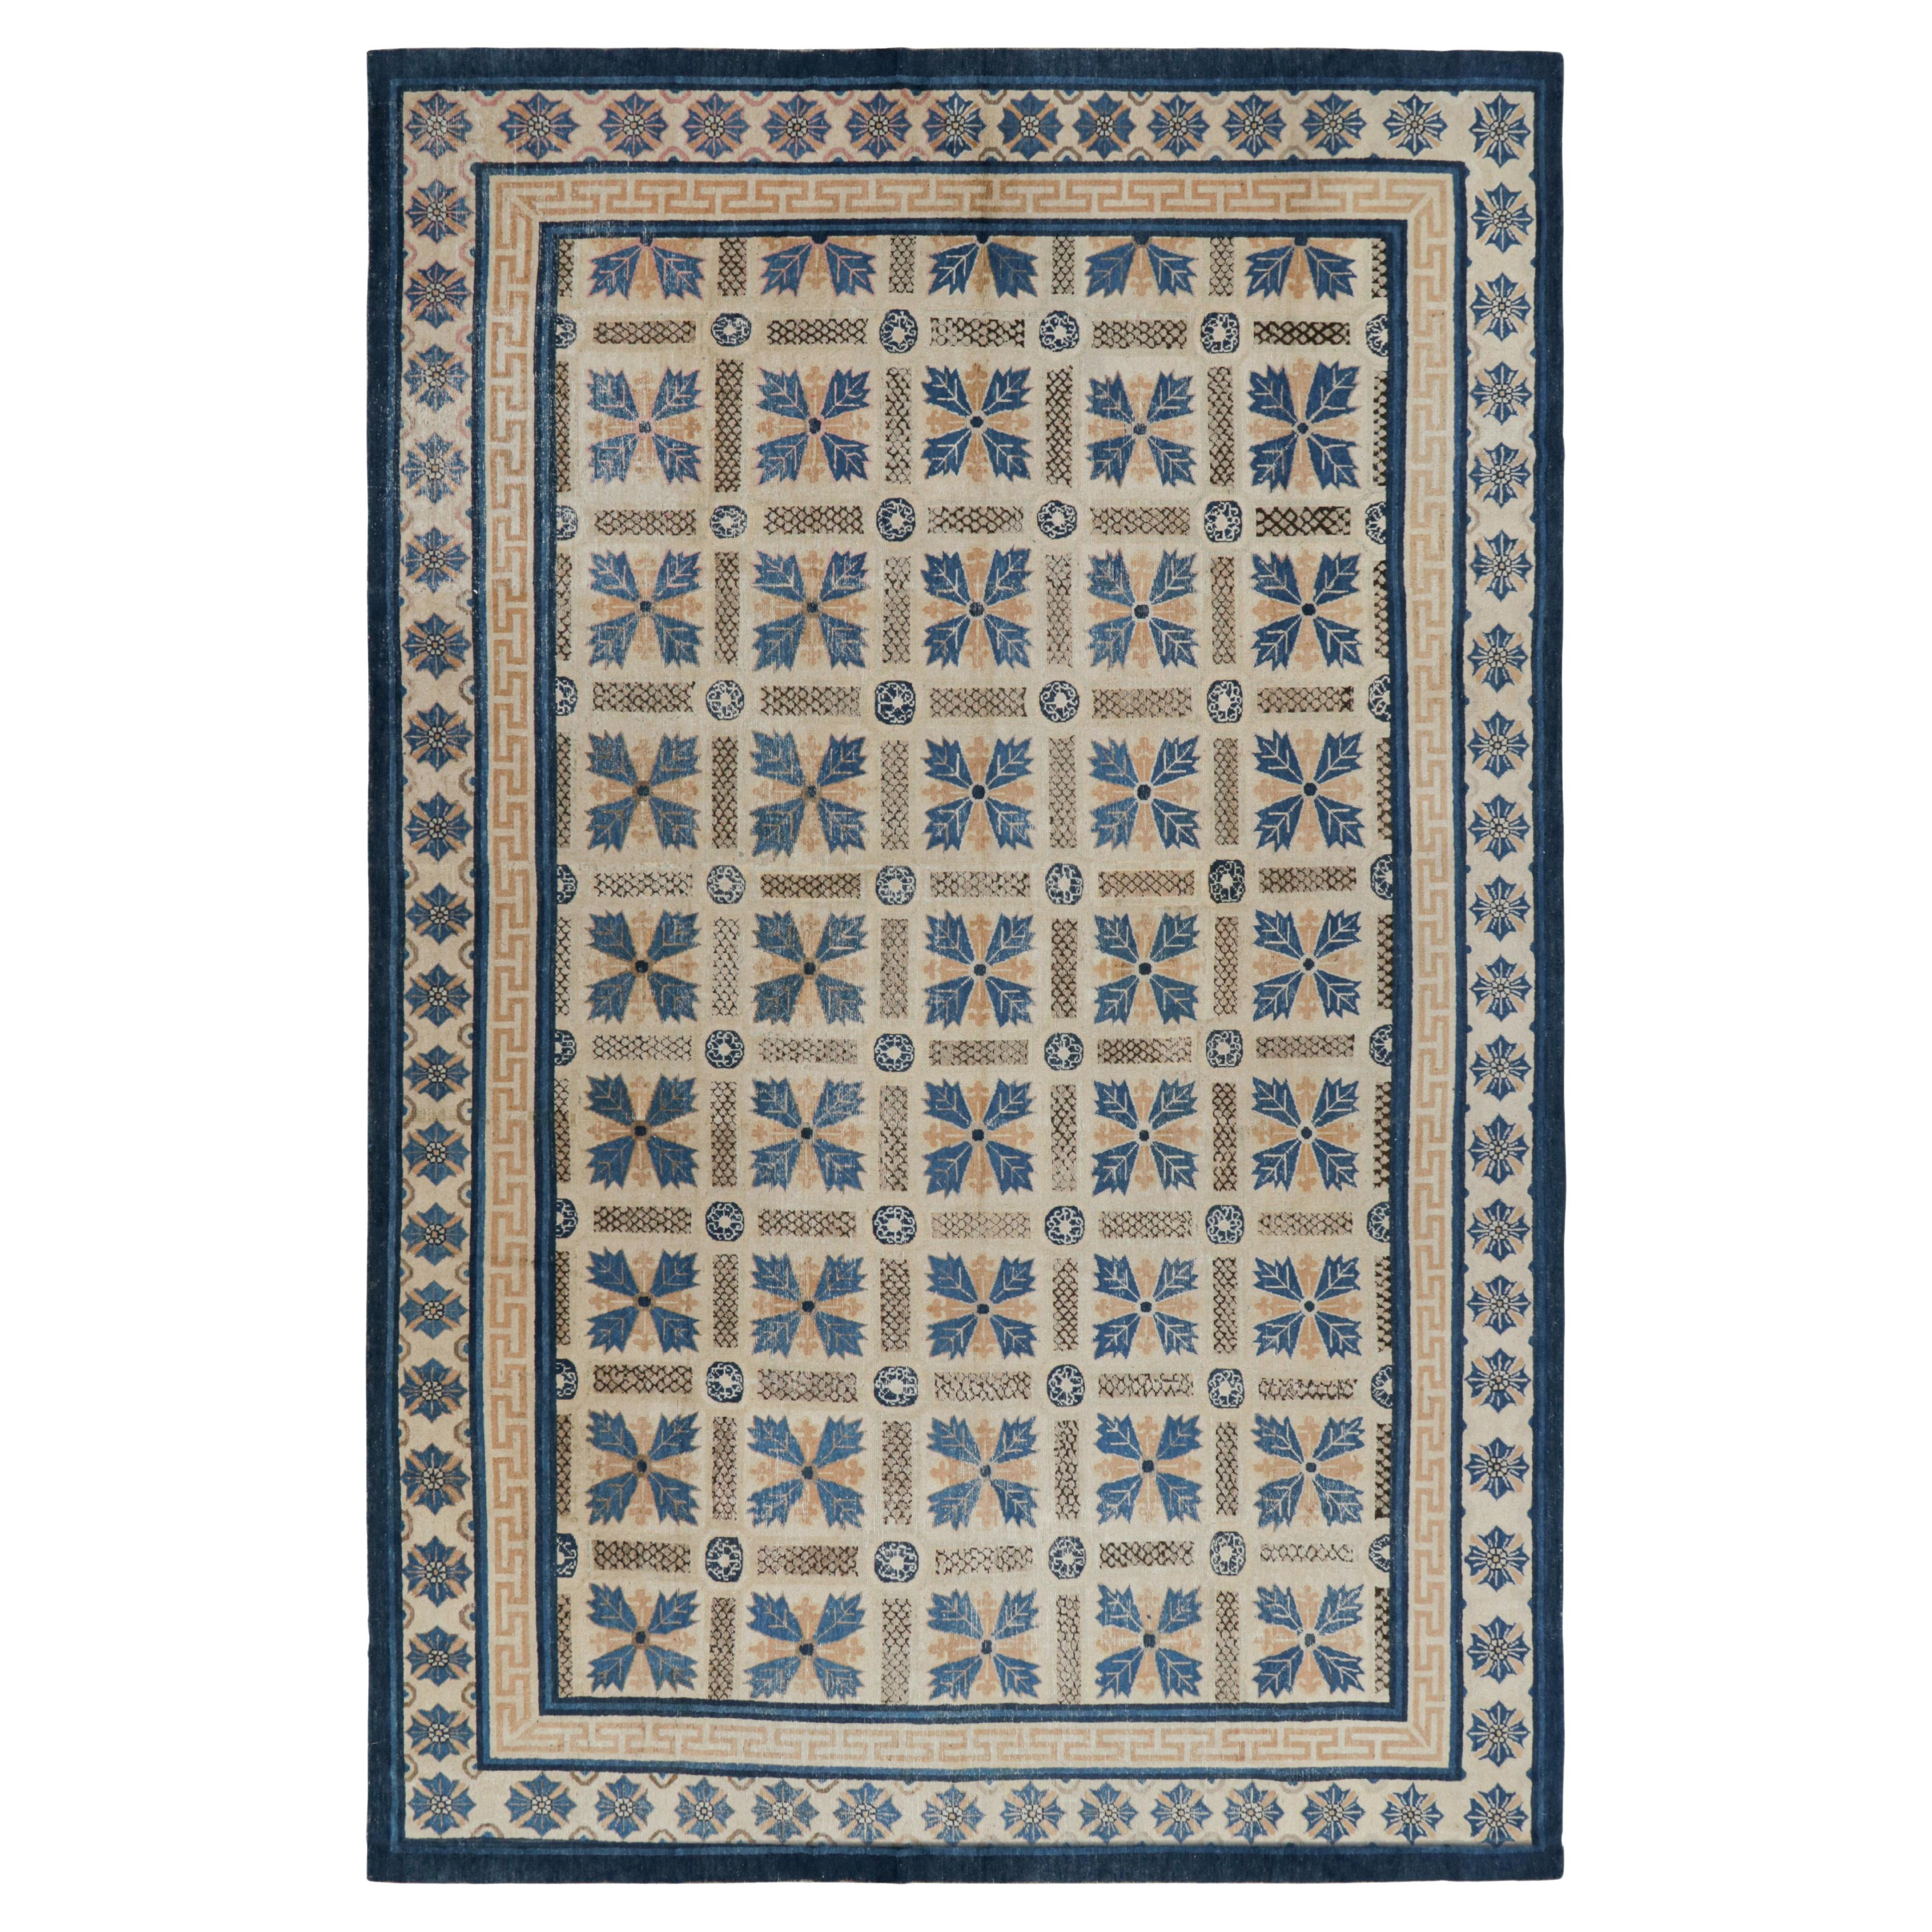 Antique Ningxia Rug in Beige-Brown and Blue Floral Patterns